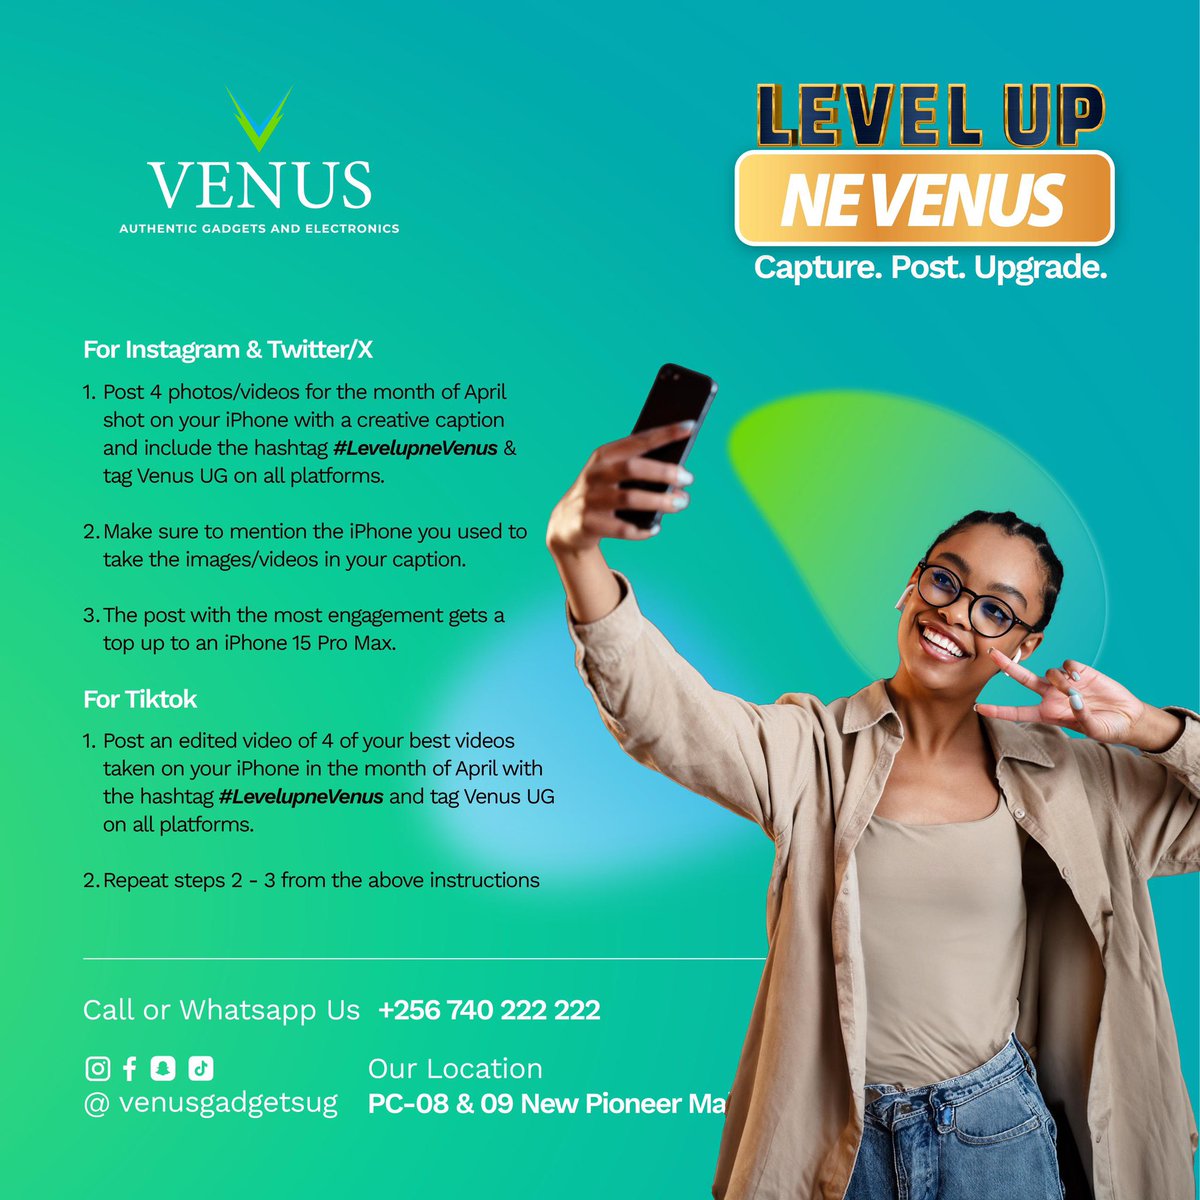 This month’s photo dump could get you a brand new iPhone 15 pro max 
Just capture,post and stand a chance to win 
#LevelupneVenus